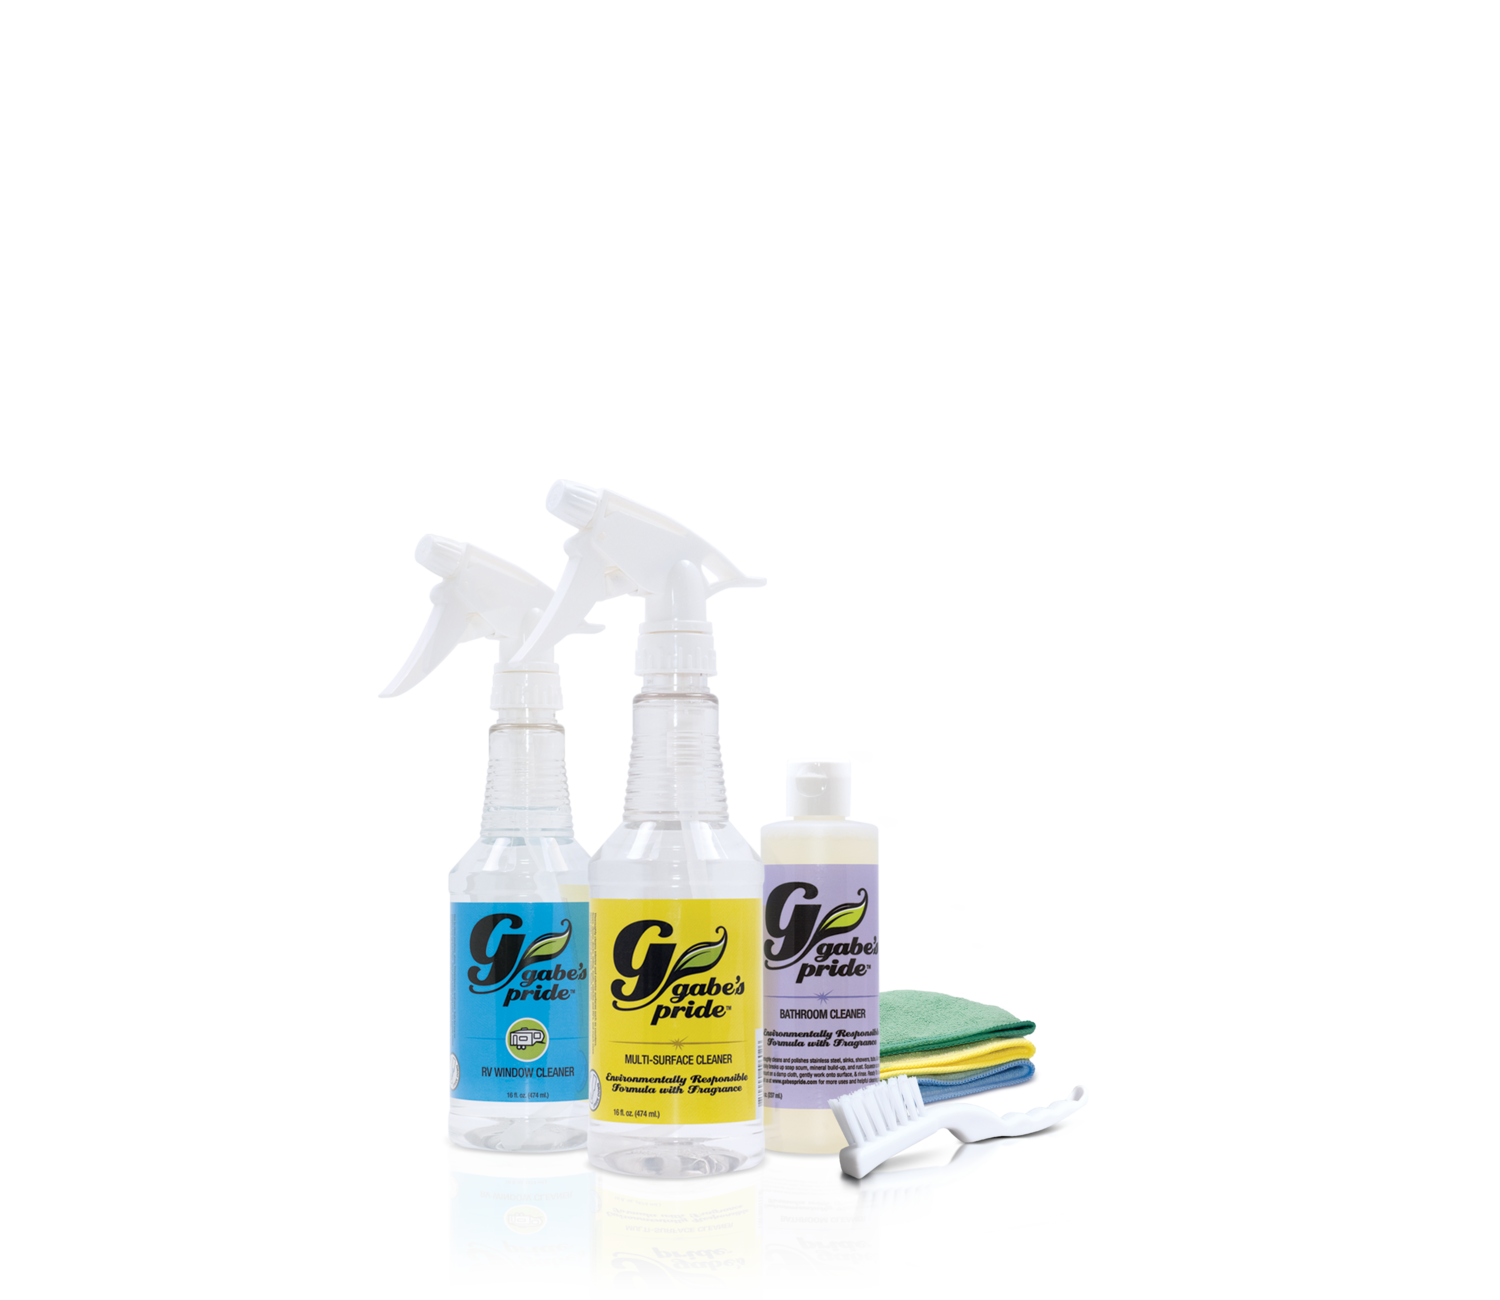 RV Everyday Essentials Cleaning Kit